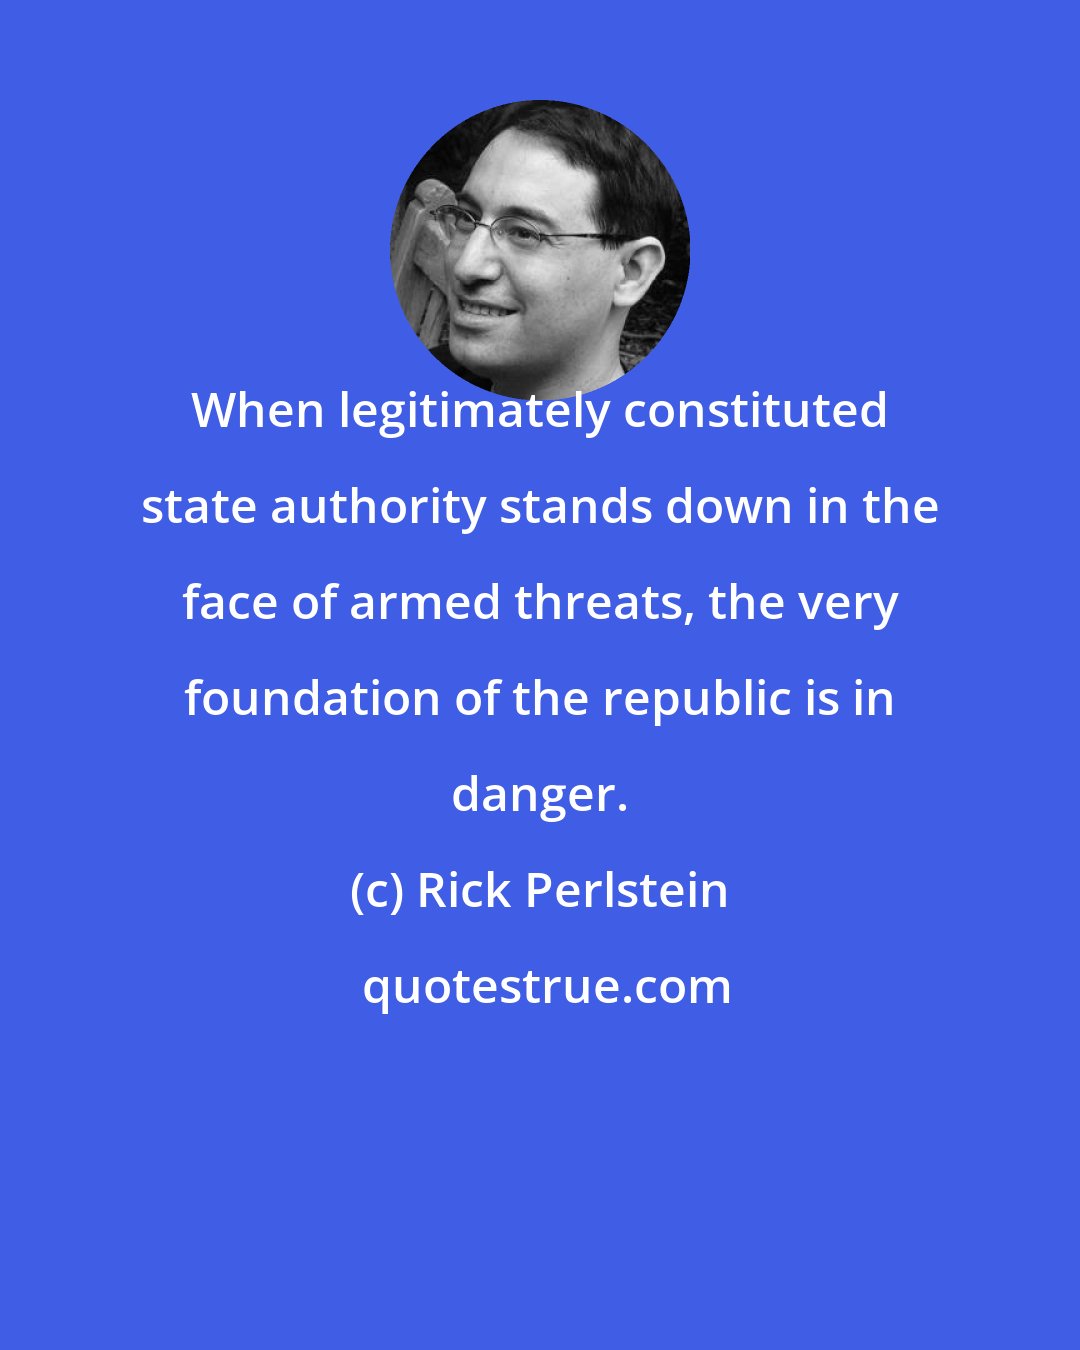 Rick Perlstein: When legitimately constituted state authority stands down in the face of armed threats, the very foundation of the republic is in danger.